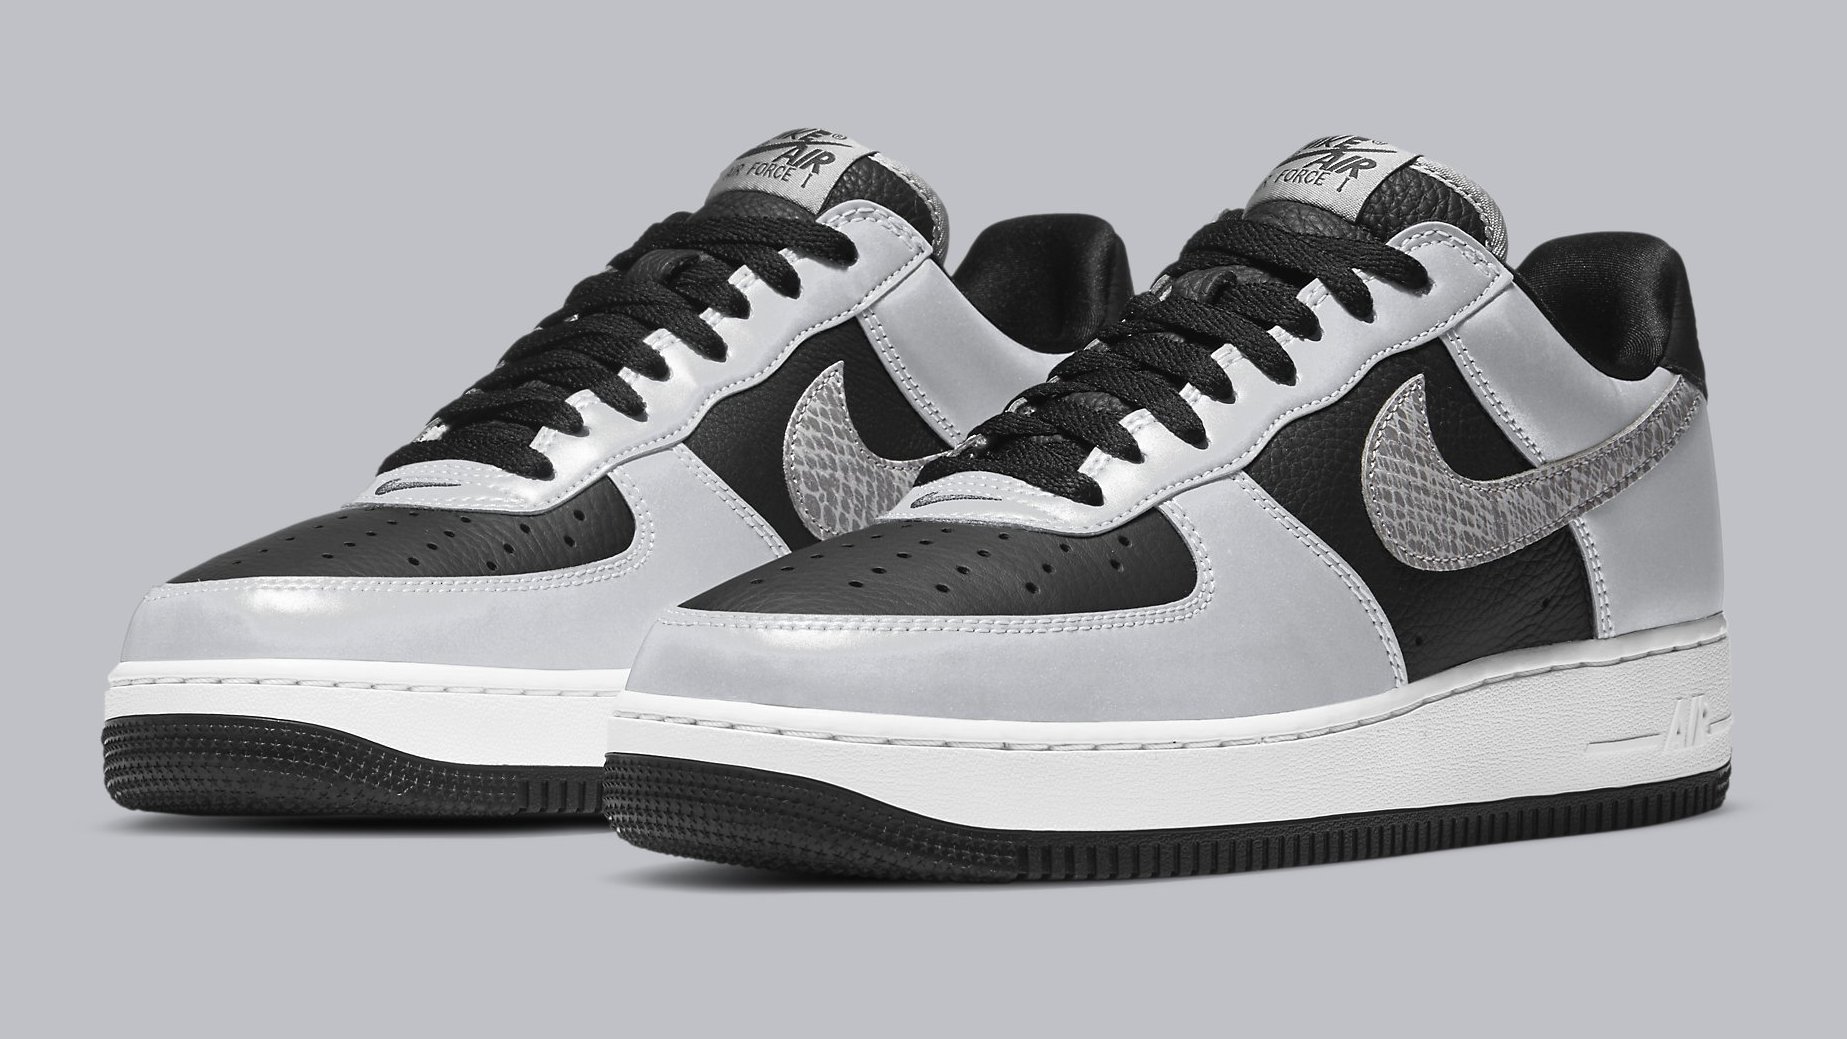 3m reflective nike air force 1